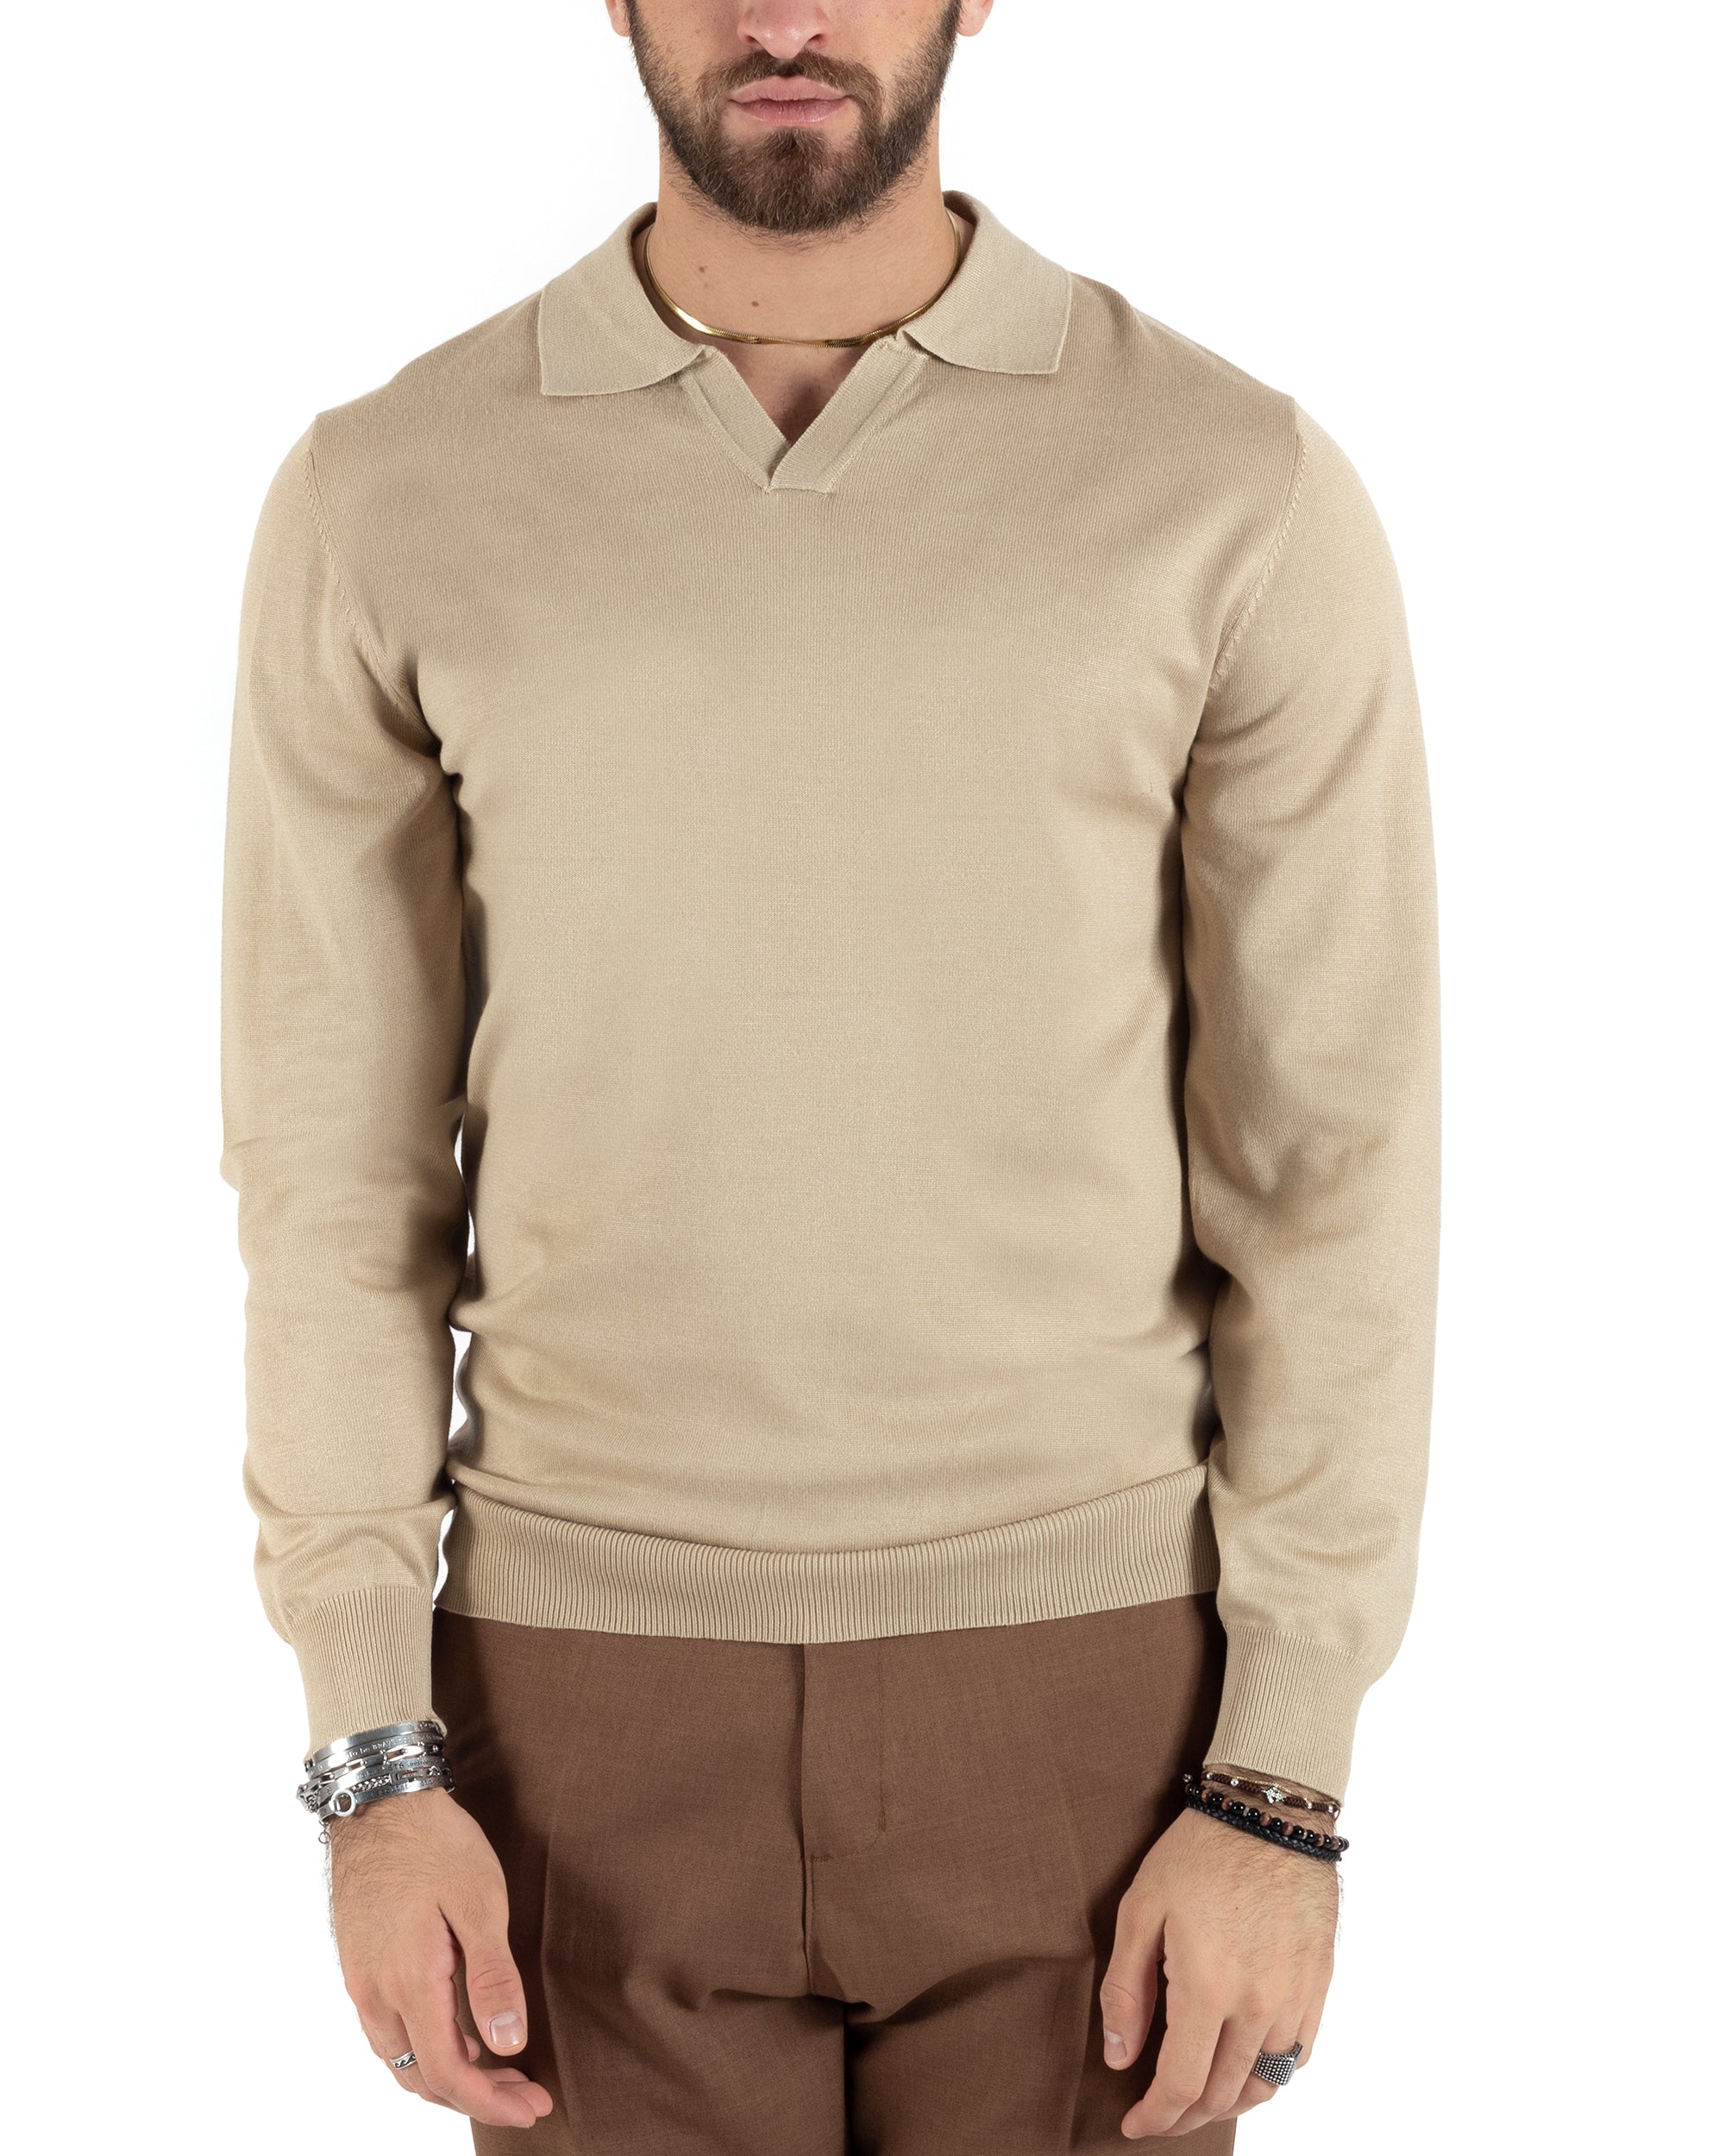 Men's Casual Crewneck Sweater Solid Color Long Sleeve Olive Green GIOSAL M2495A